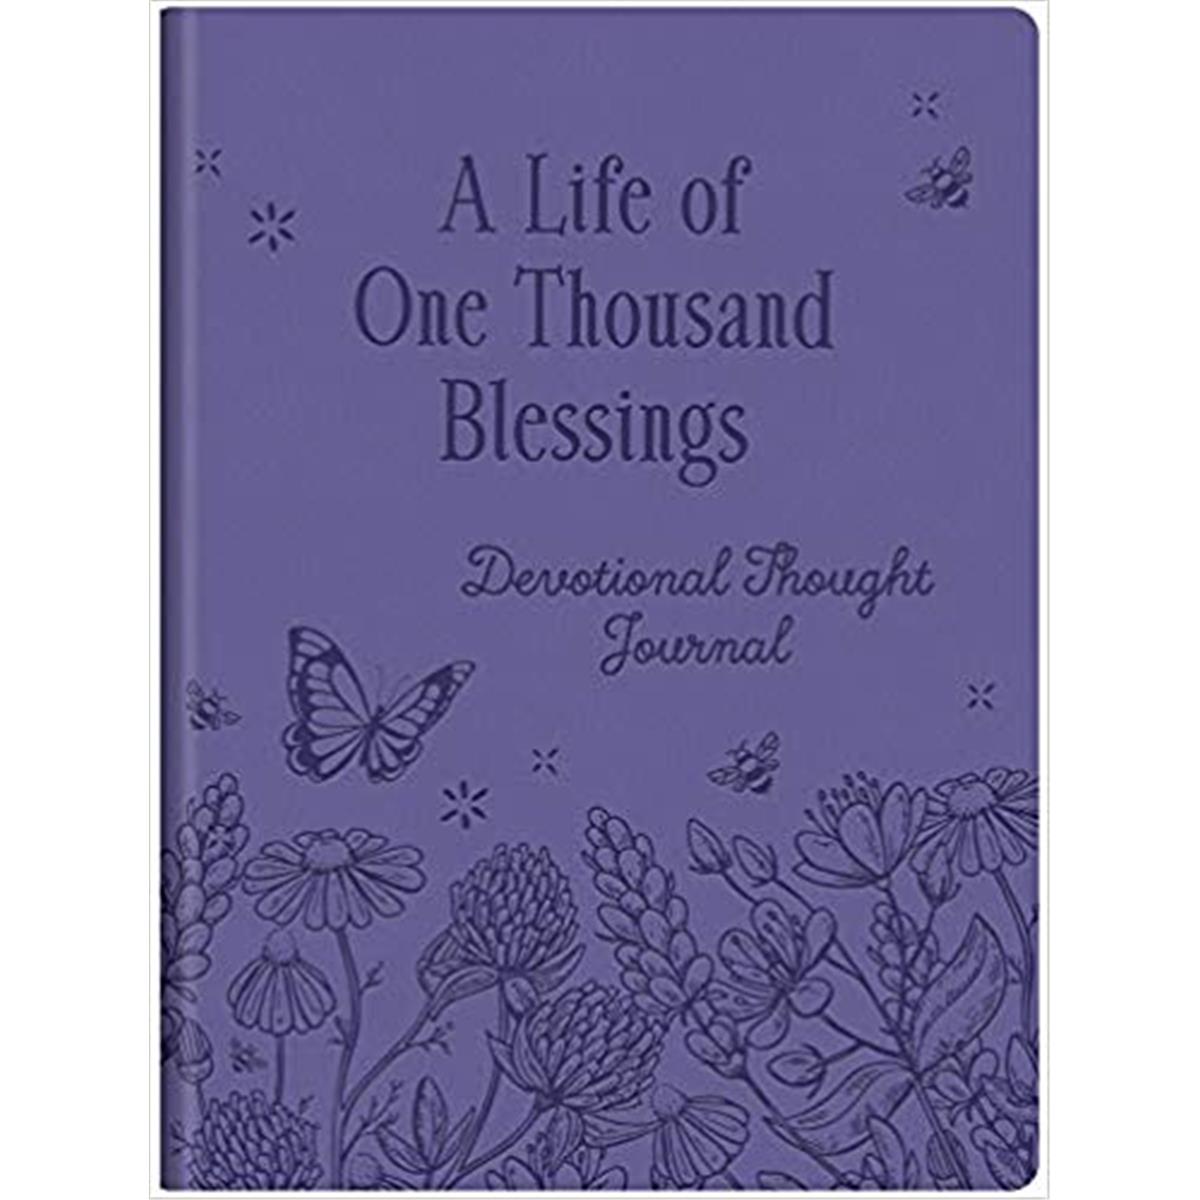 Barbour Publishing 137296 A Life Of One Thousand Blessings